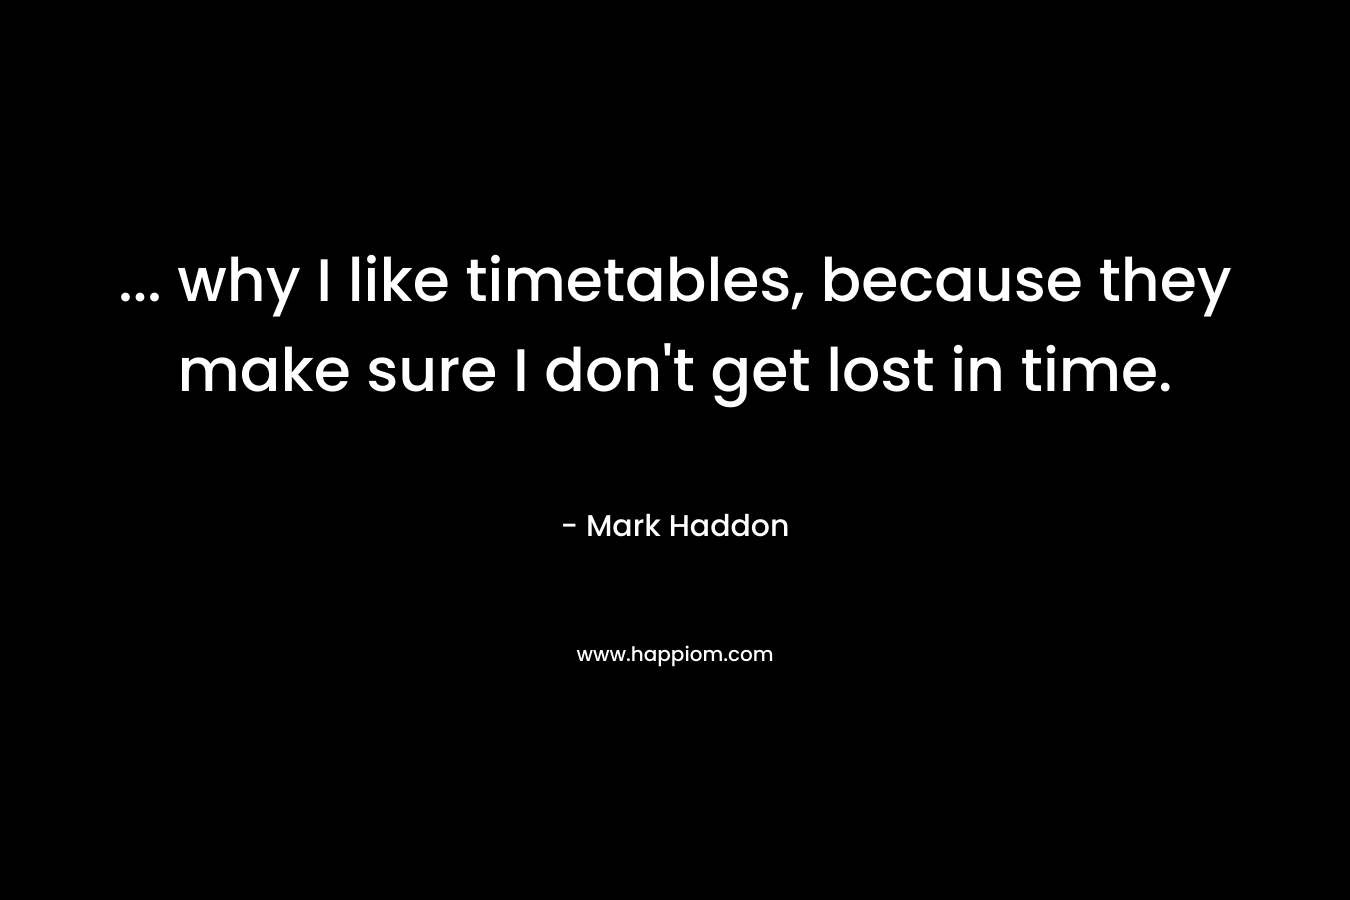 … why I like timetables, because they make sure I don’t get lost in time. – Mark Haddon